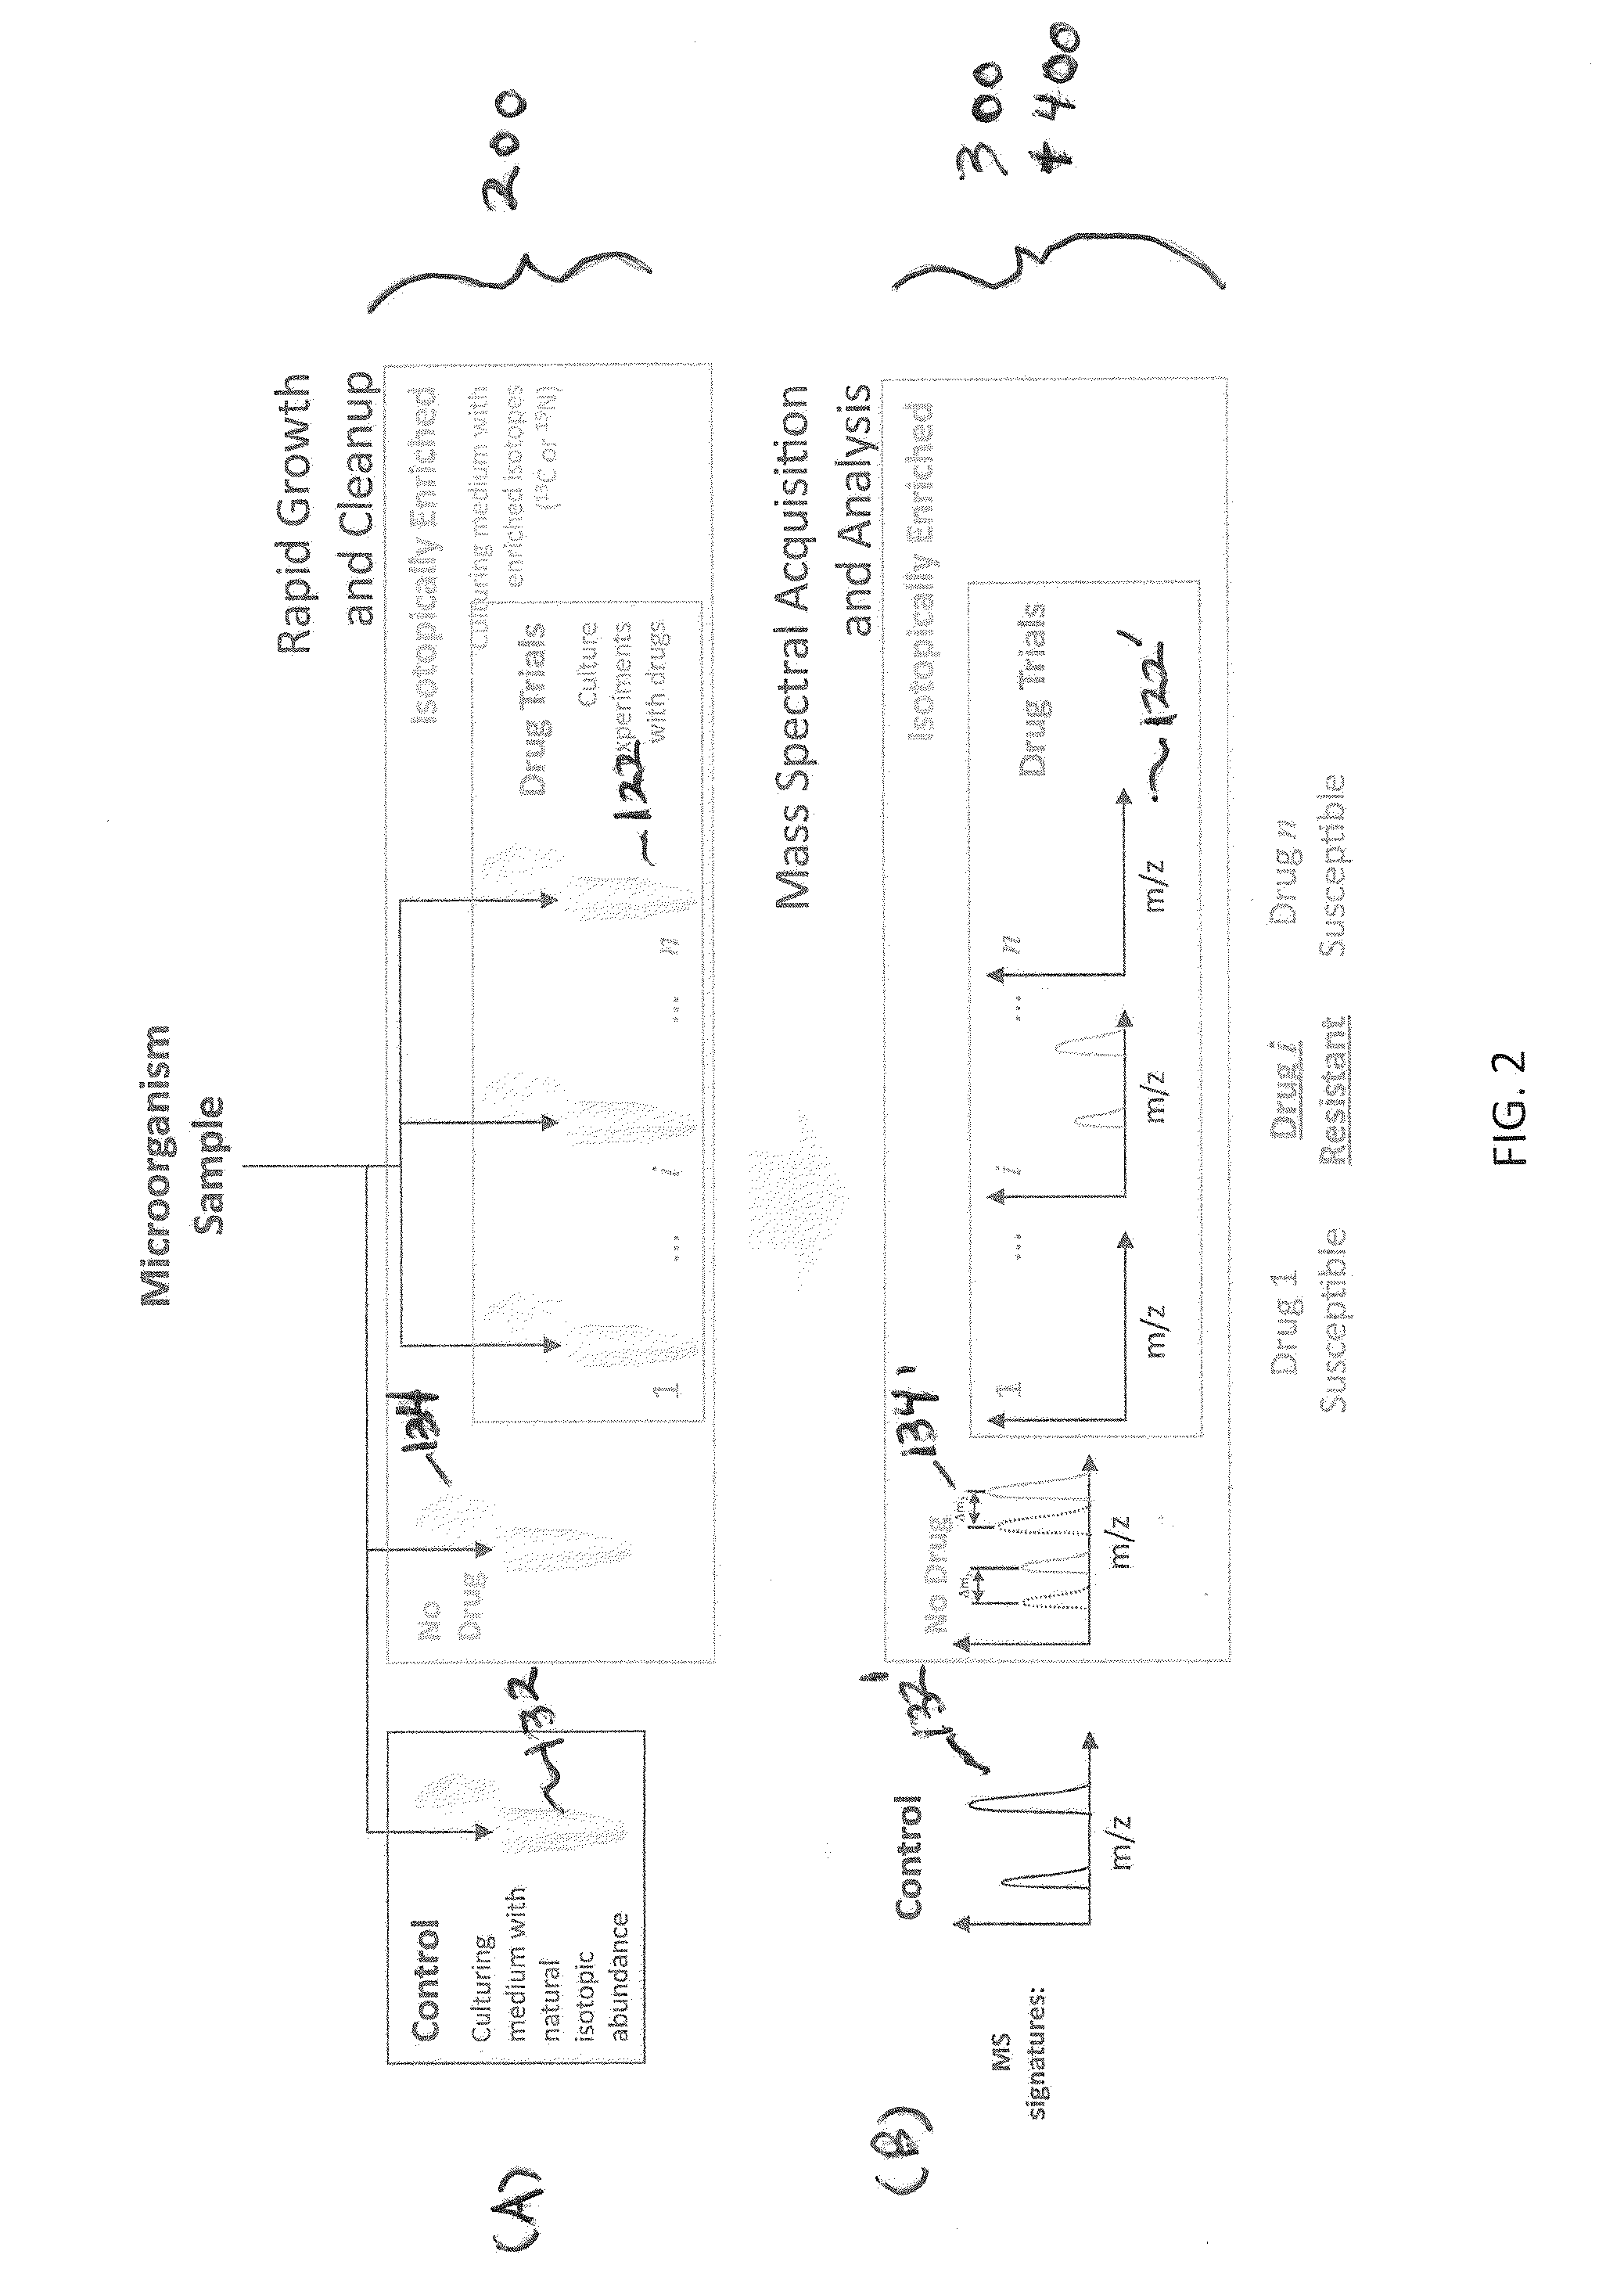 Systems and methods for determining drug resistance in microorganisms